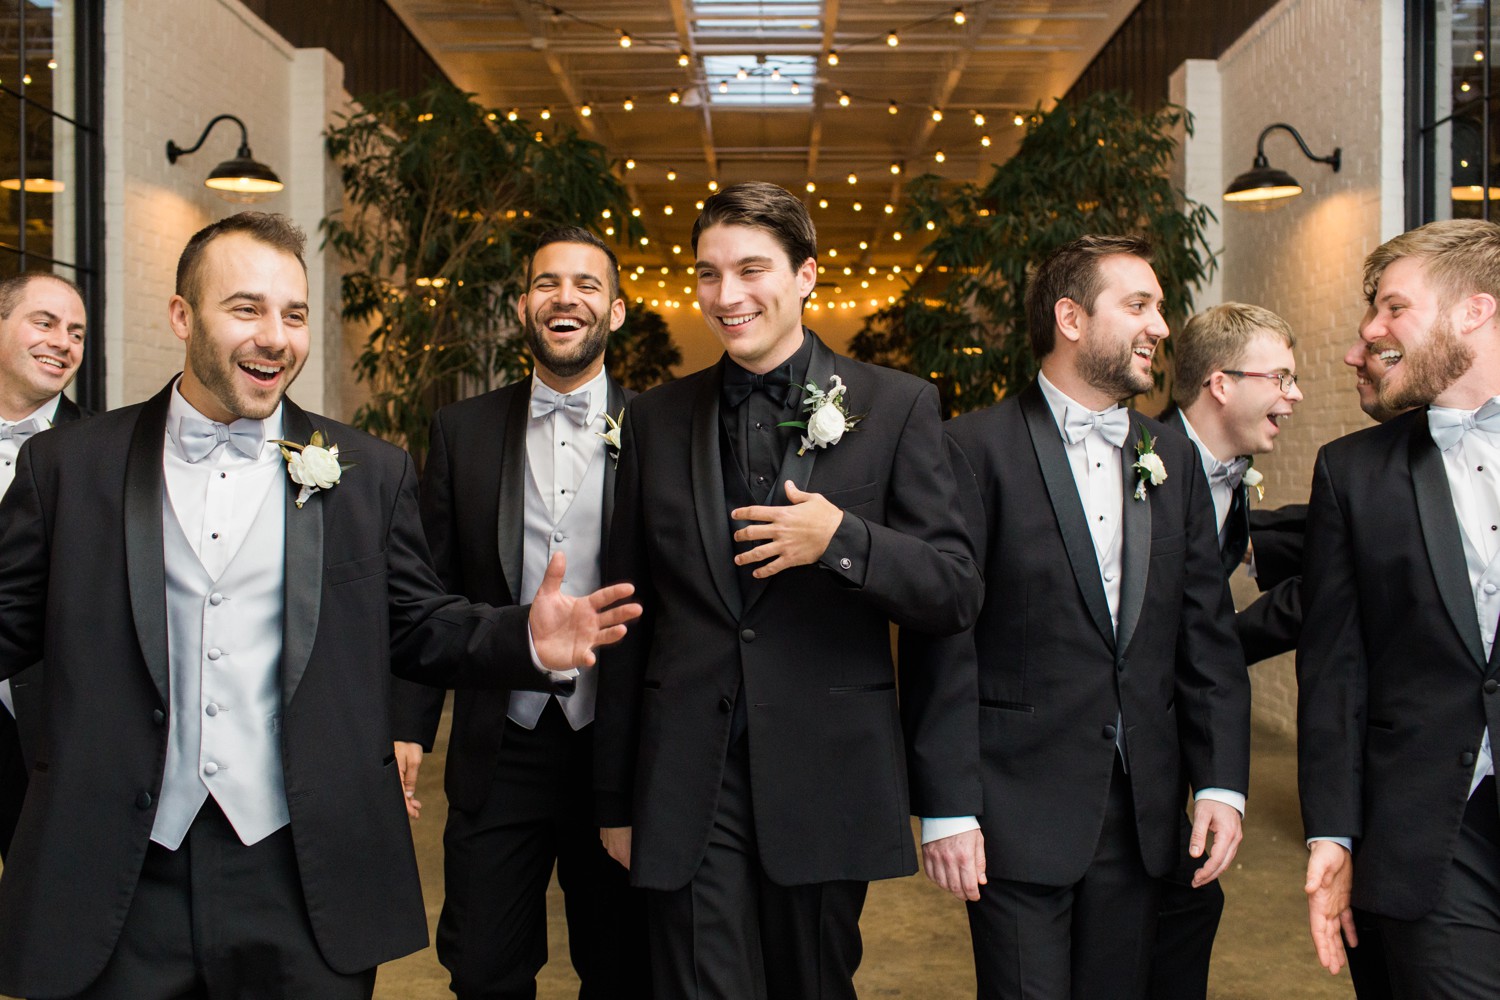 Stave Room Bridal Party Photos 